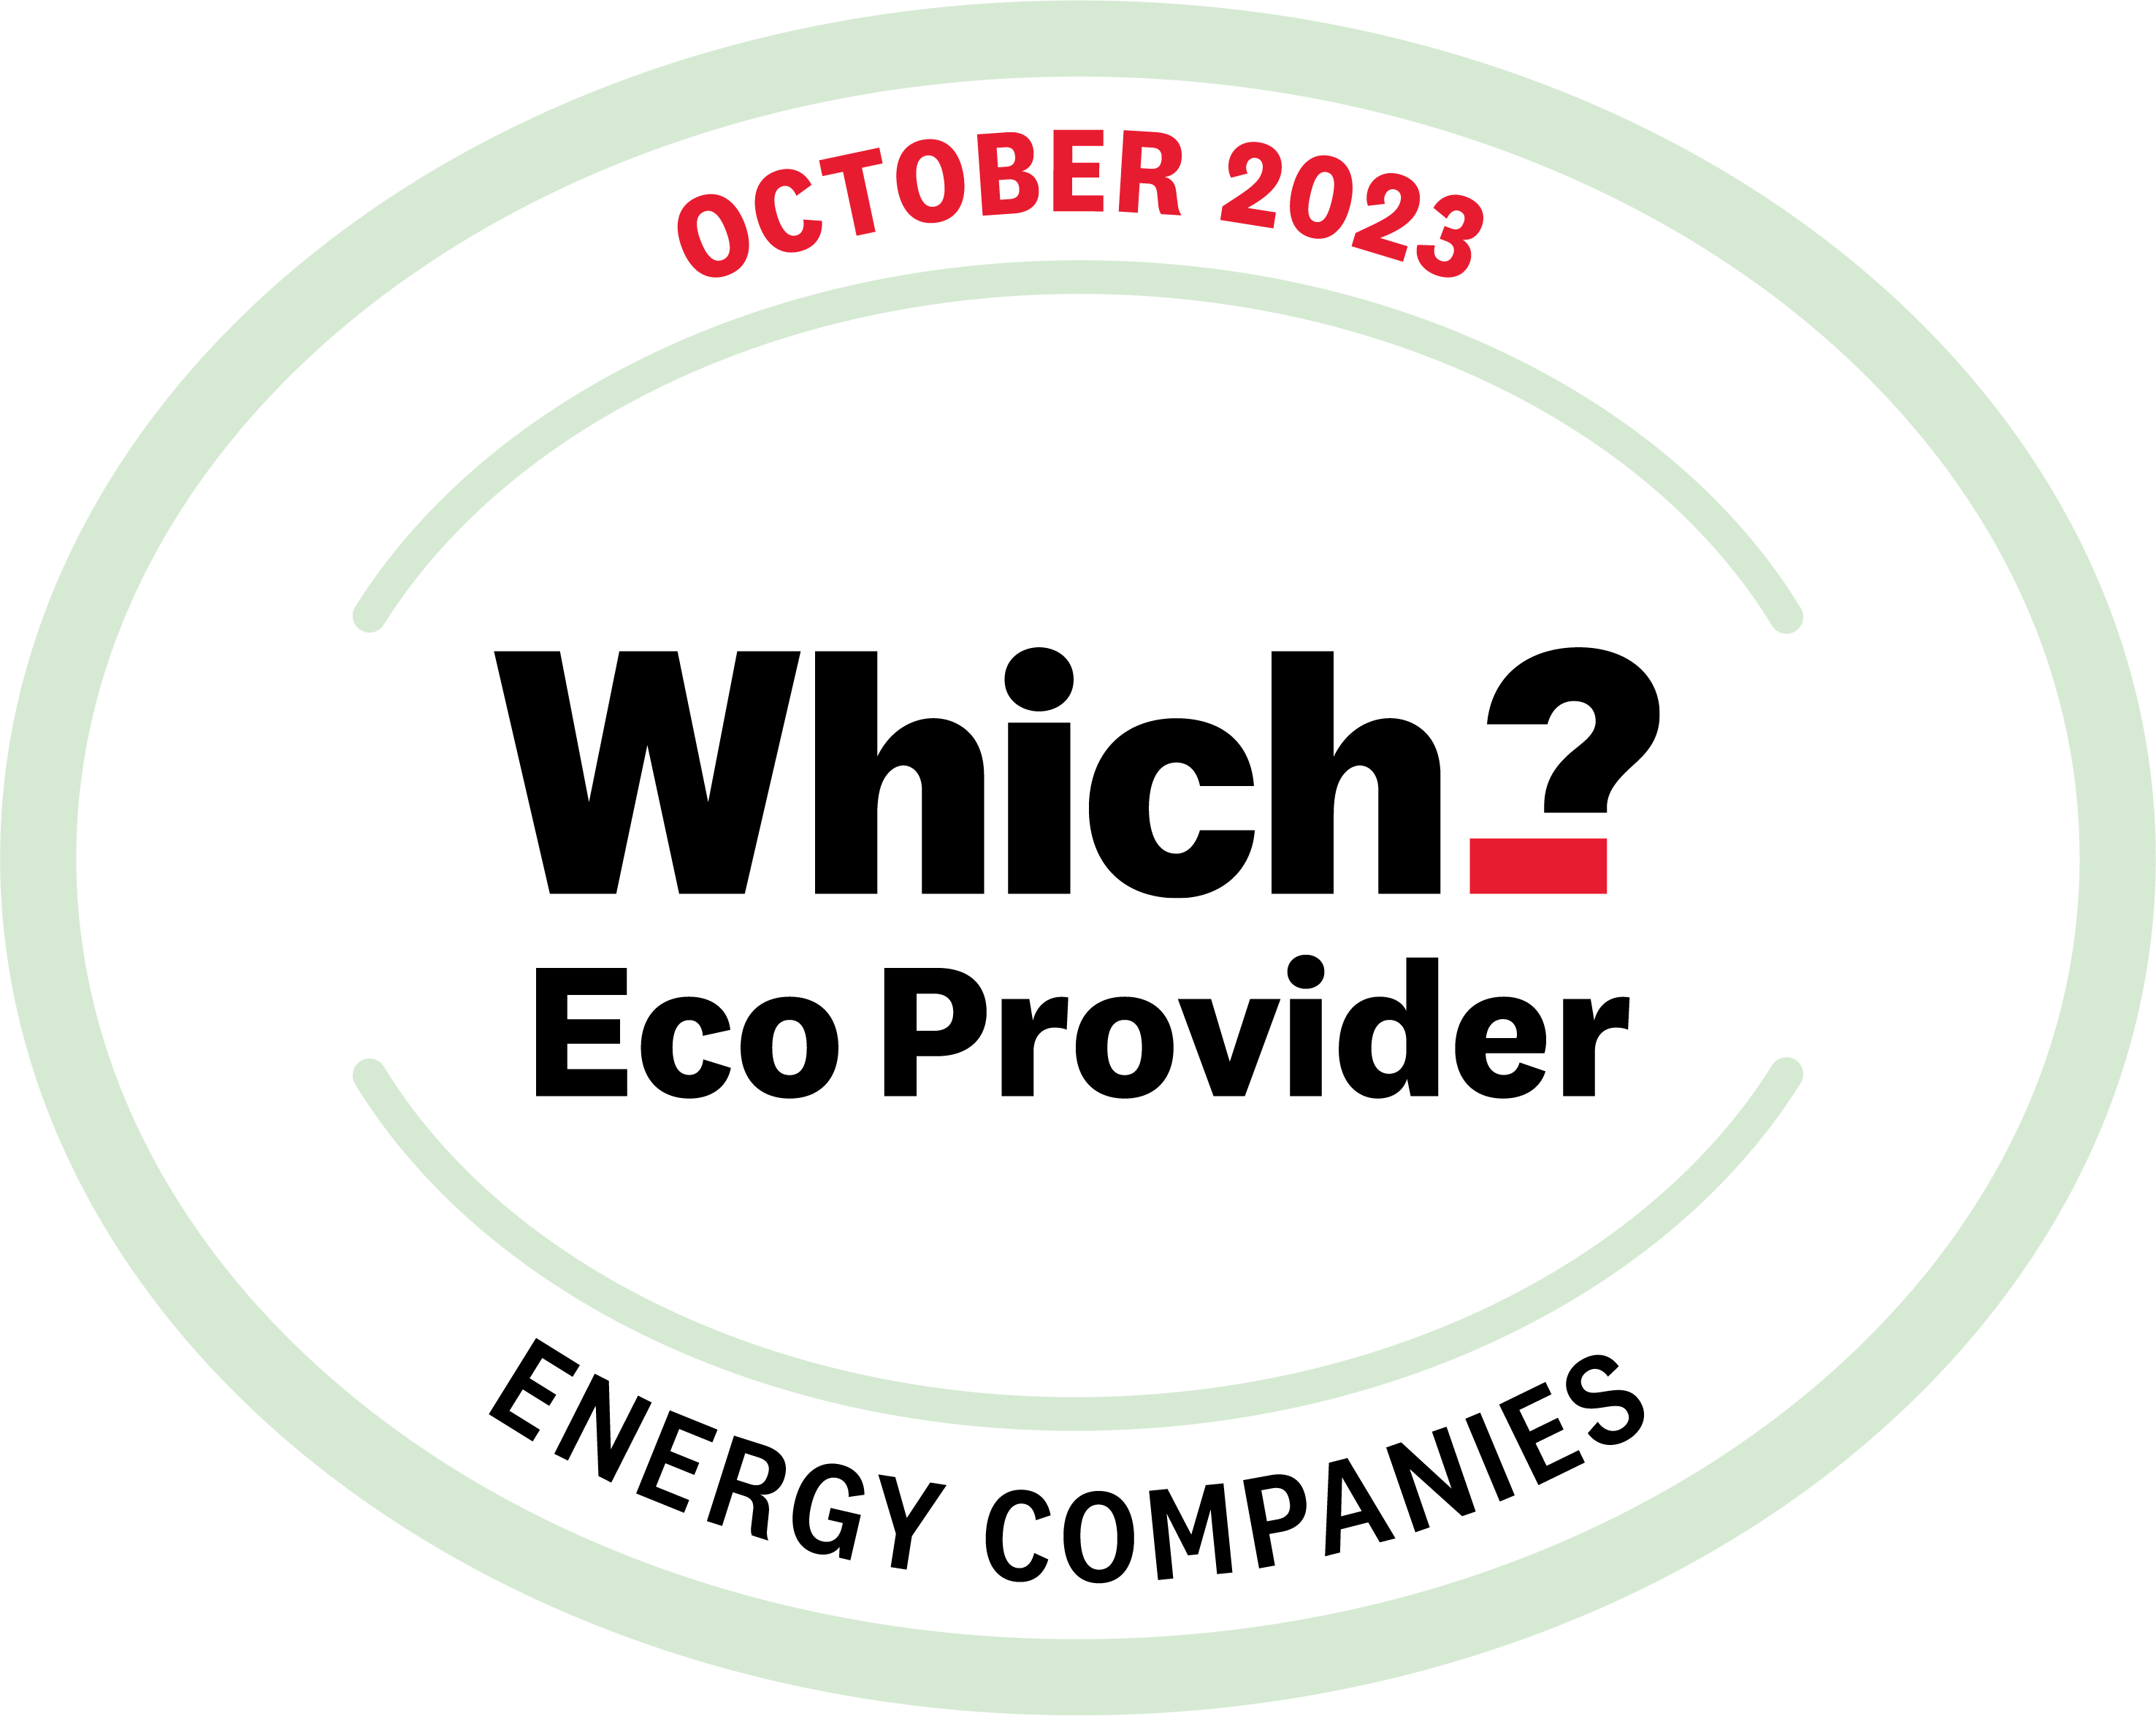 Octopus Energy is Which? Eco Provider for October 2023